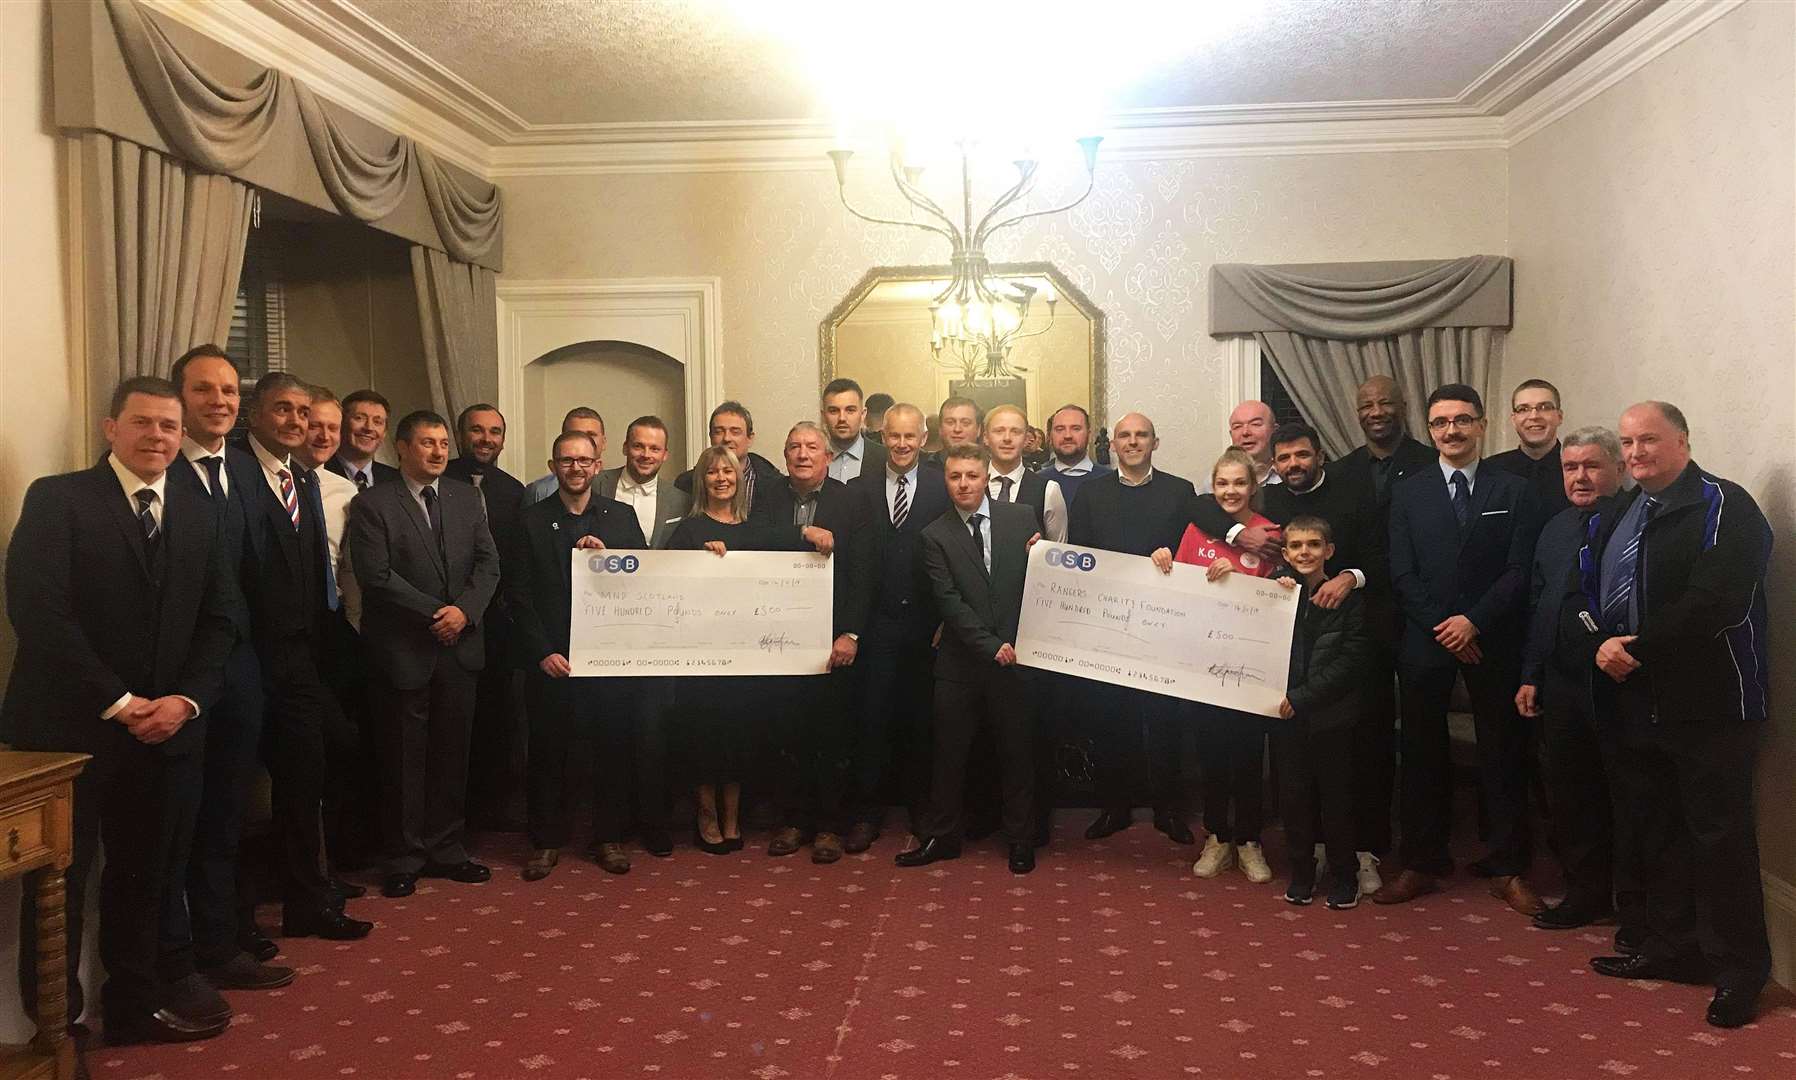 The cheques for MND Scotland and the Rangers Charity Foundation are handed over at the sportsman's dinner in Thurso attended by former Rangers players Nacho Novo, Alex Rae and Marvin Andrews.